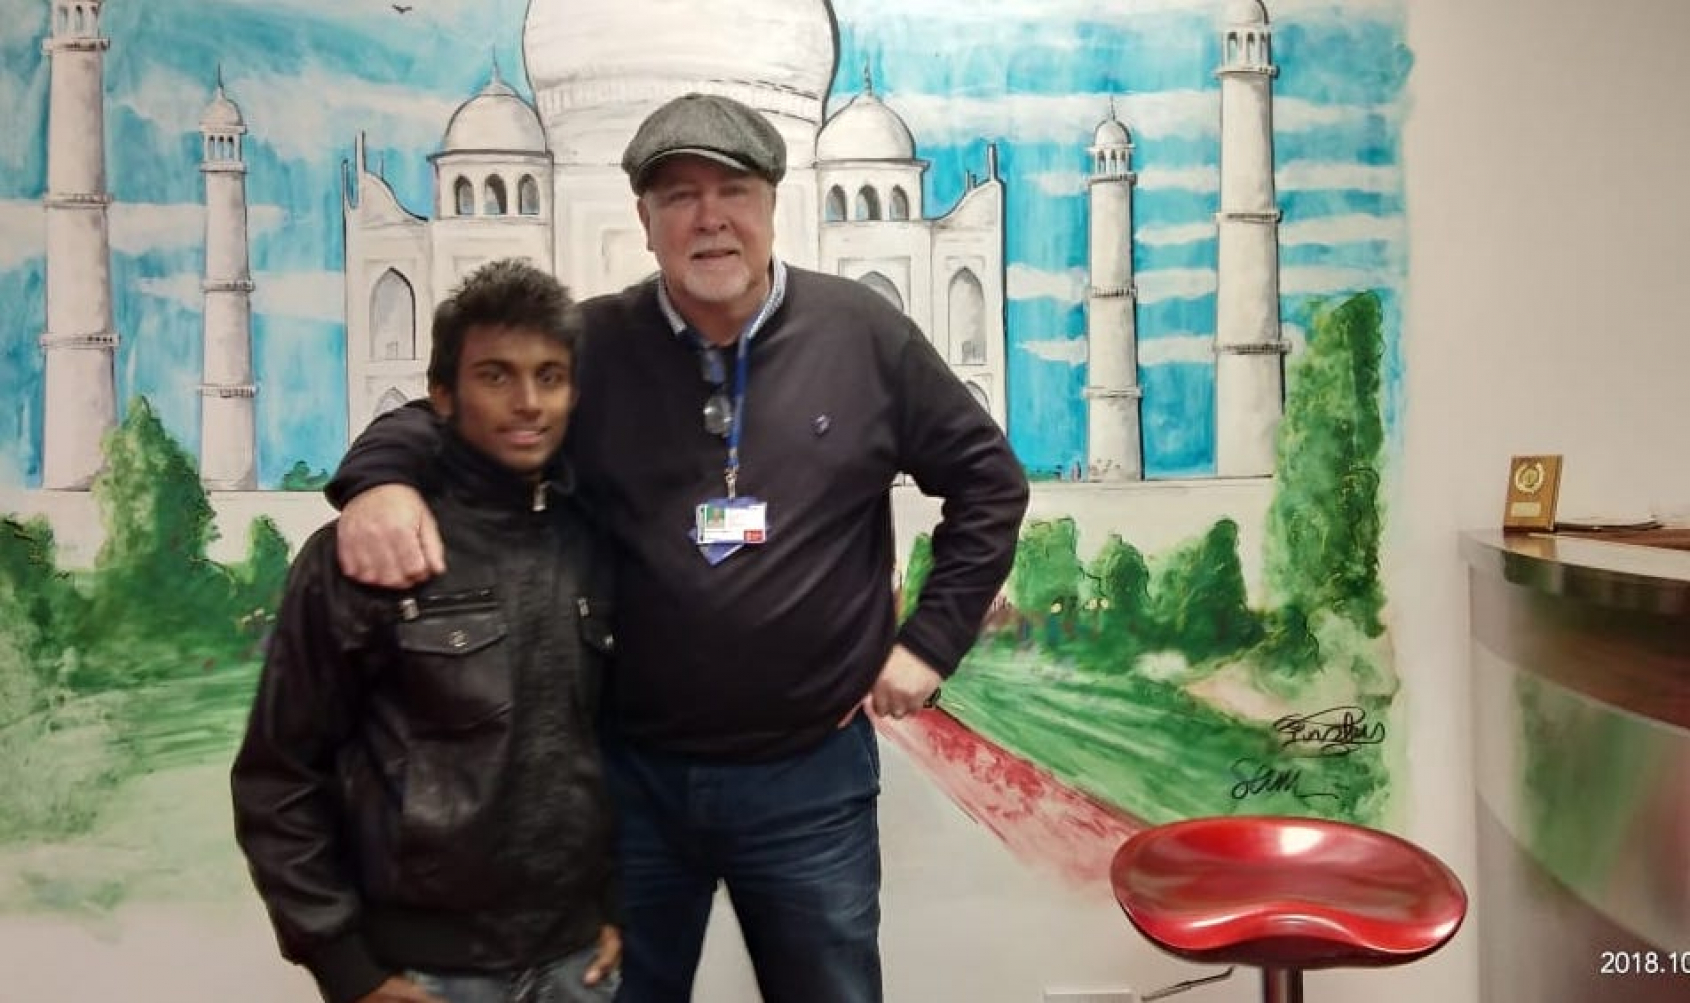 One of the India seafarers, Vasanth, and Tommy Molloy